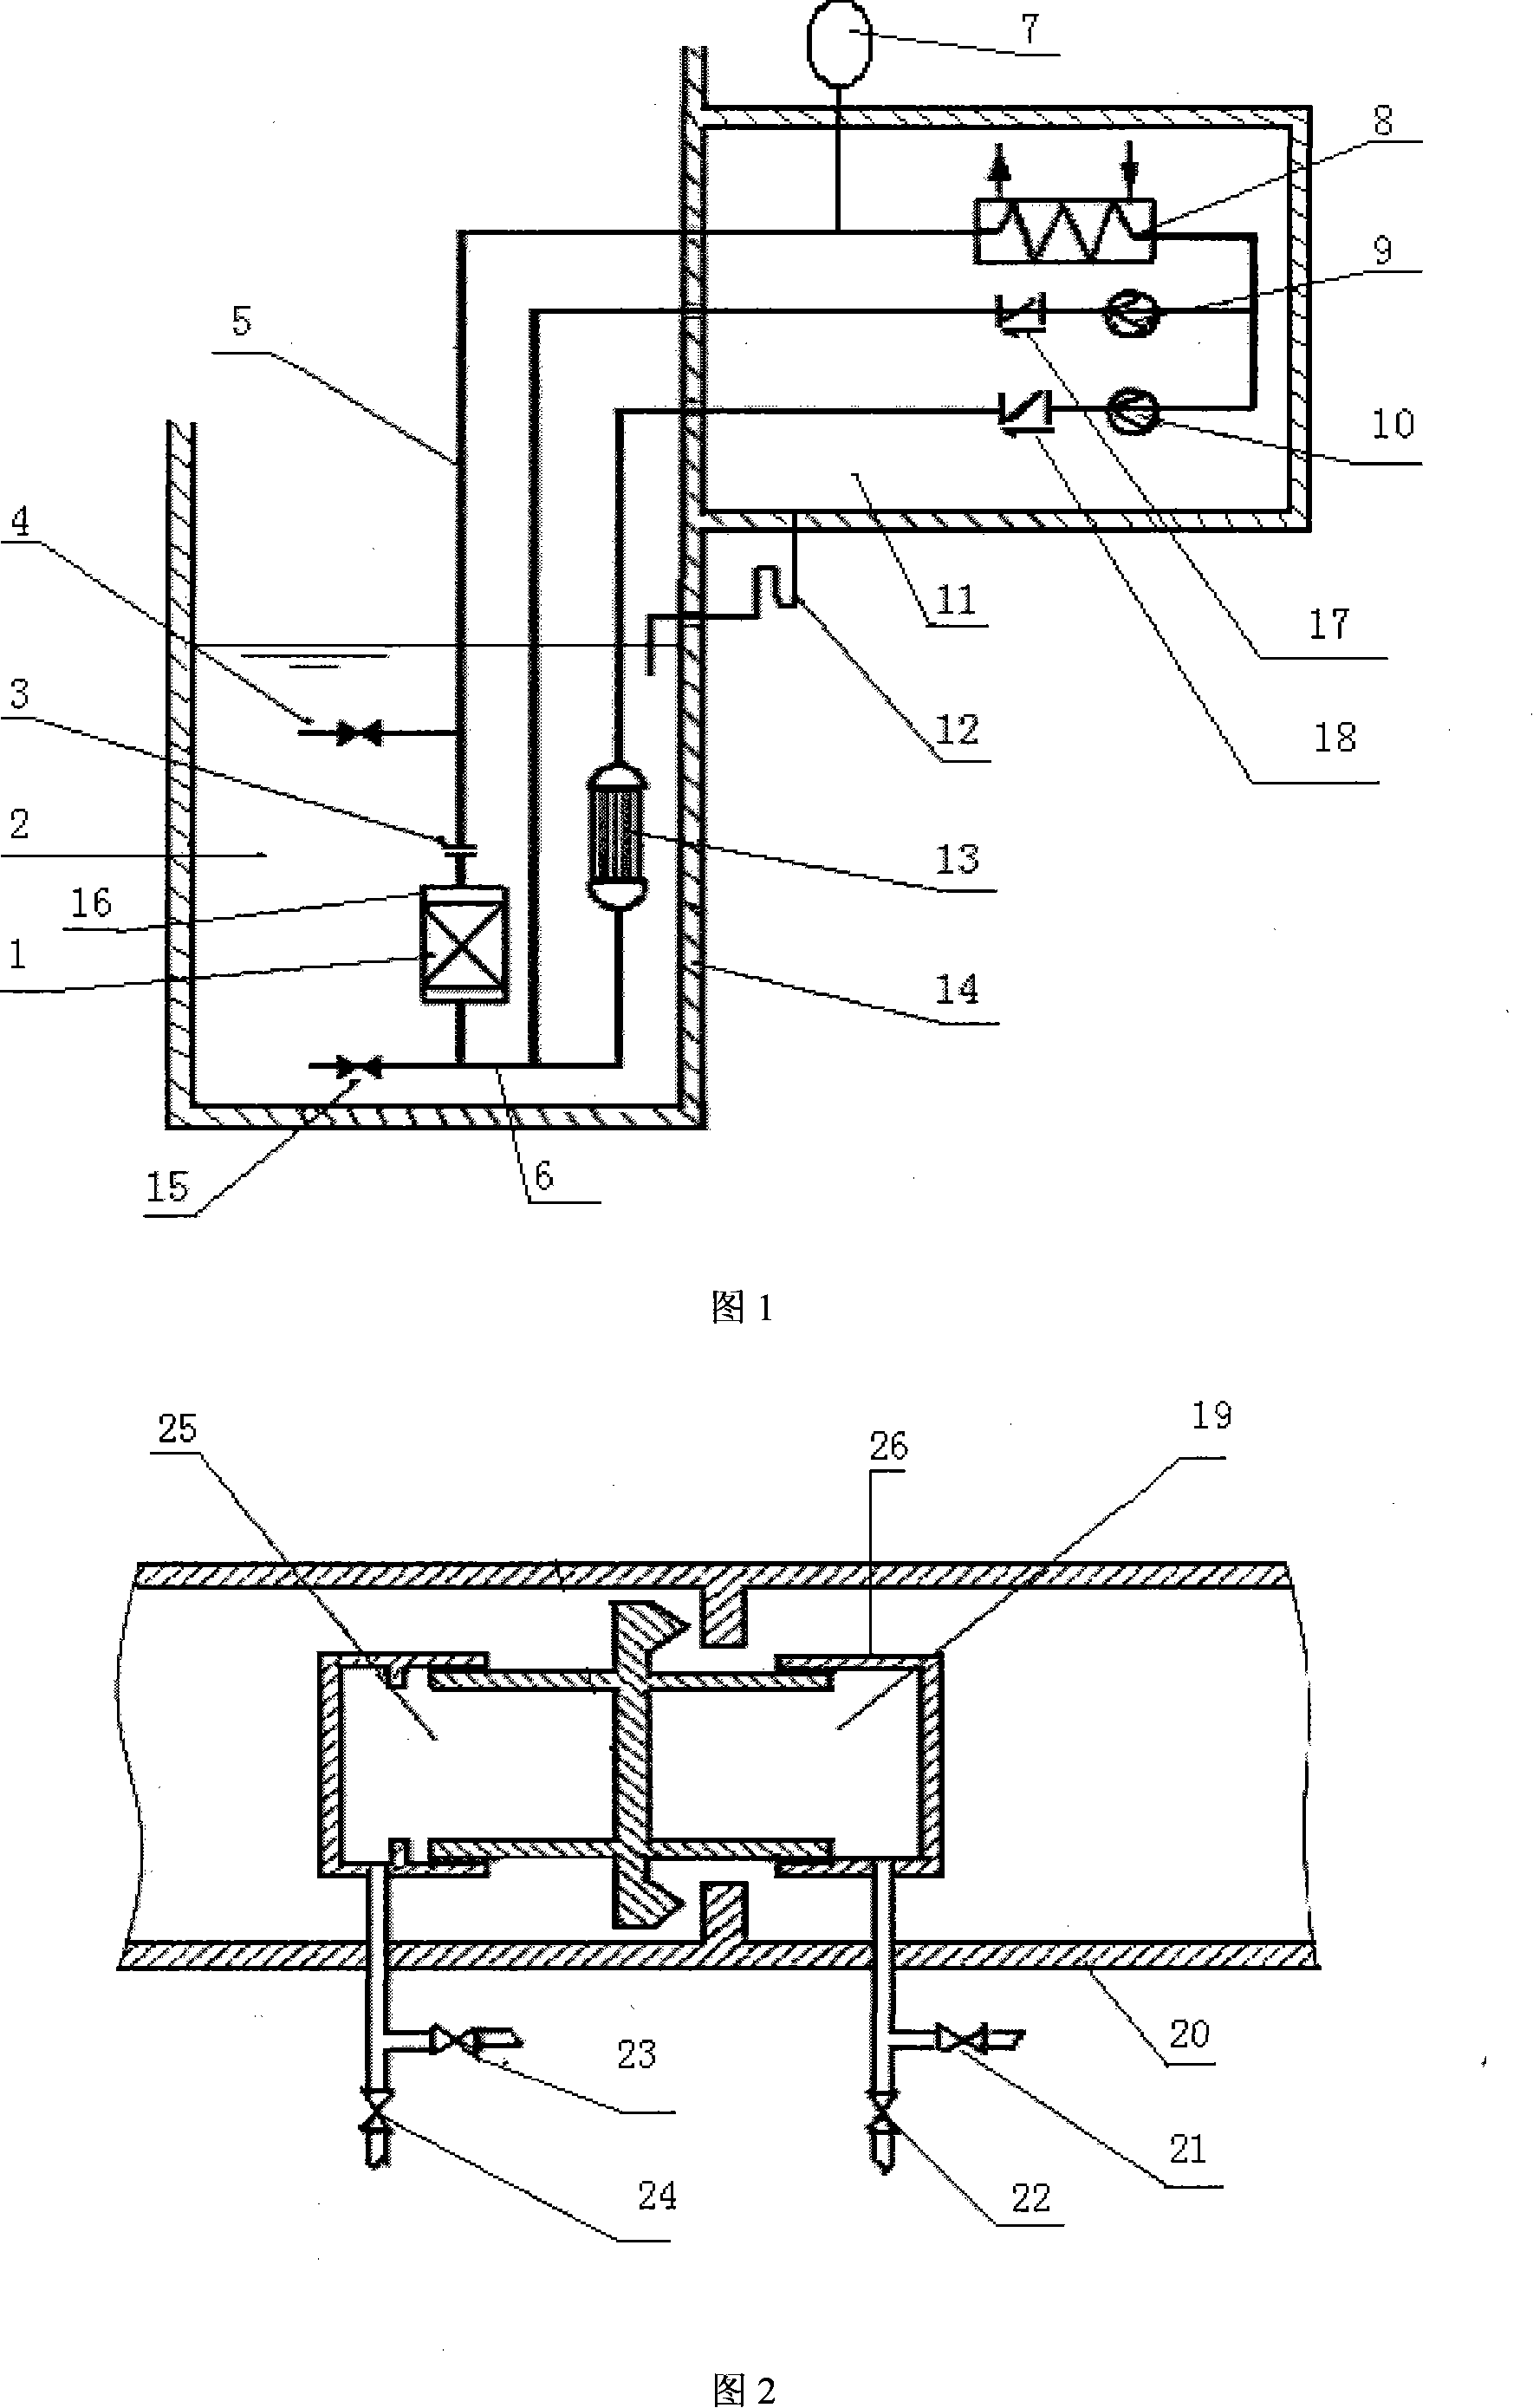 Non-kinetic inherently safe tube-pool type reactor